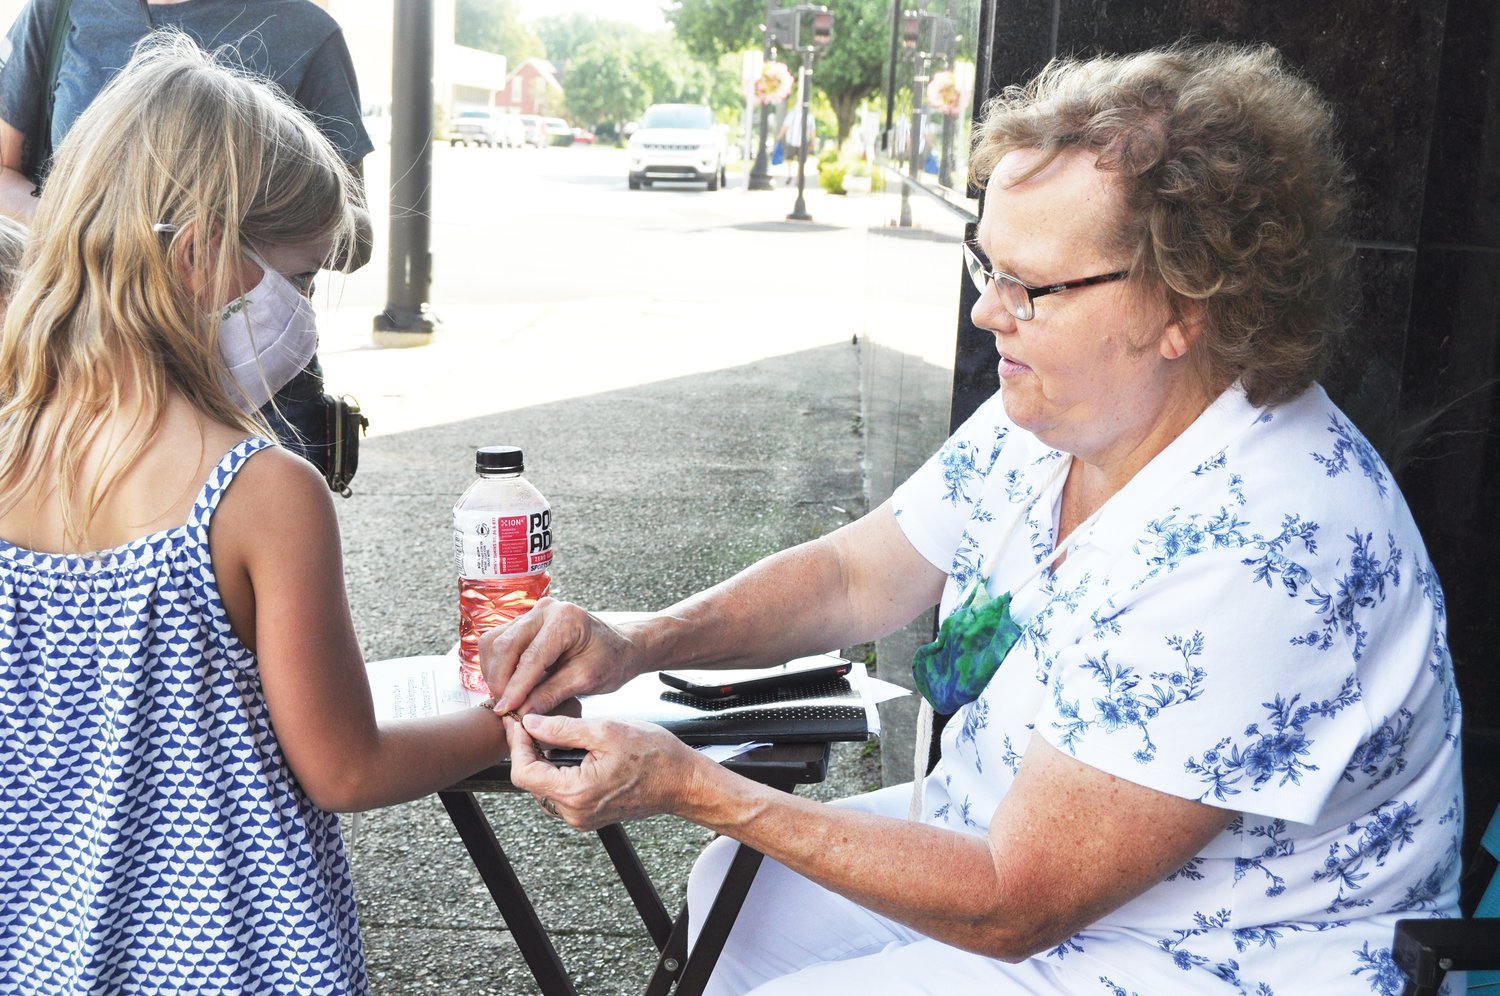 Cynthia McClure helps Charlie with a bracelet that was a prize for solving the clue for the Ben Hur Building in Athens Arts Gallery's Art Quest on Saturday in downtown Crawfordsville. The event is part of the gallery's 10th anniversary celebration.